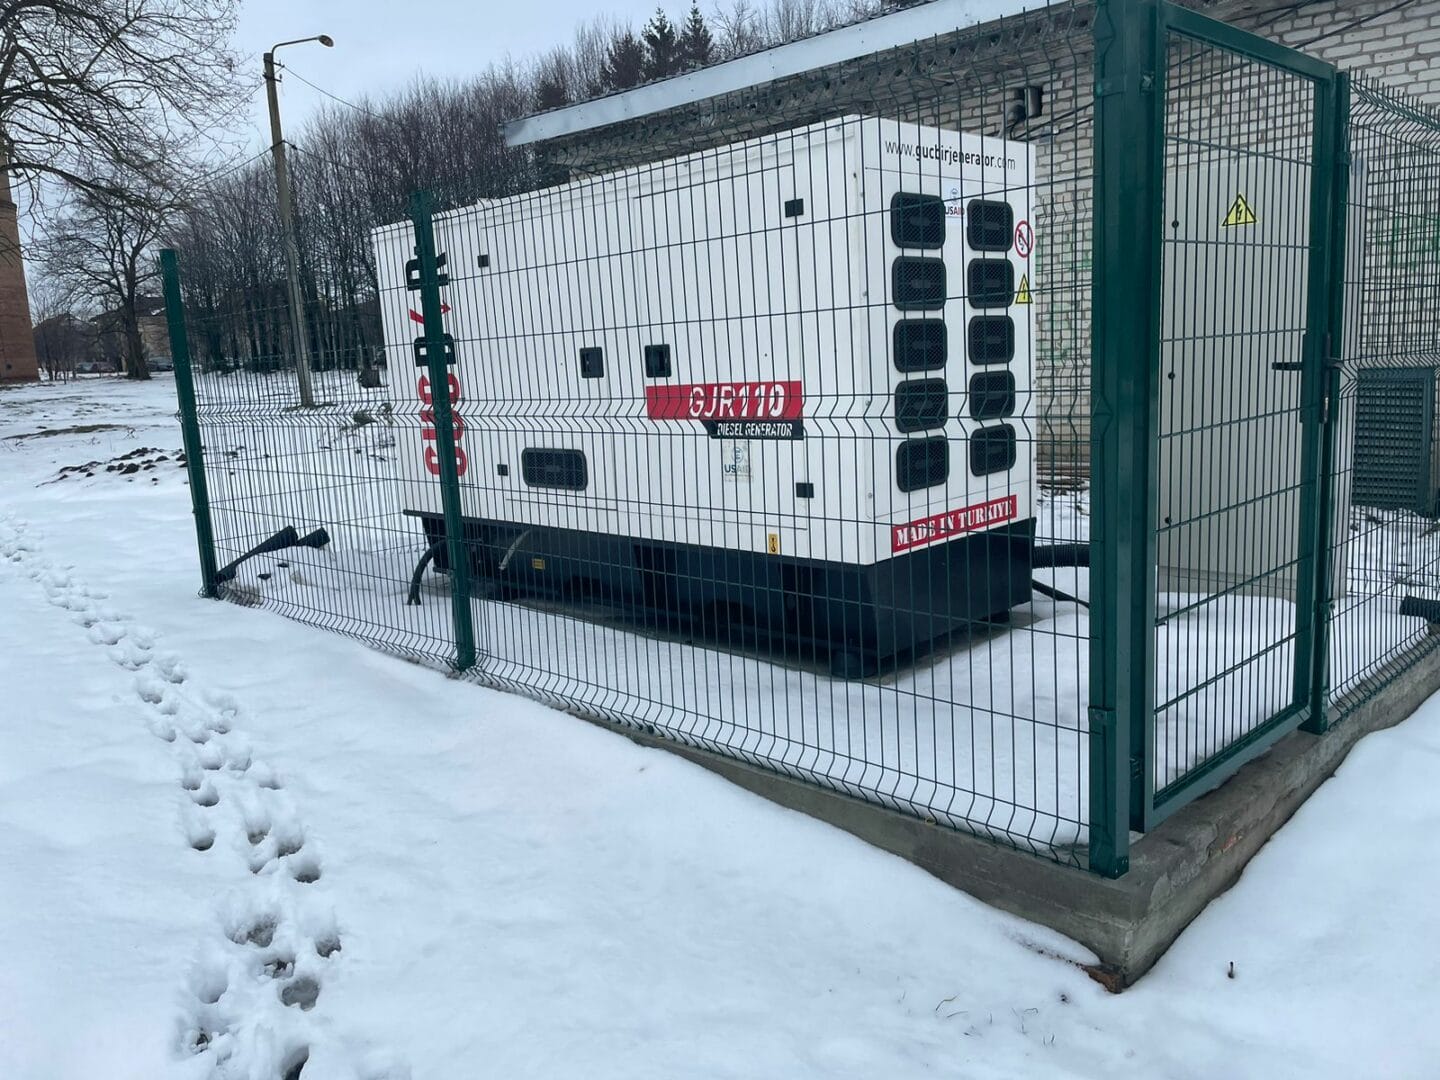 One of the generators provided under the Hoverla Project